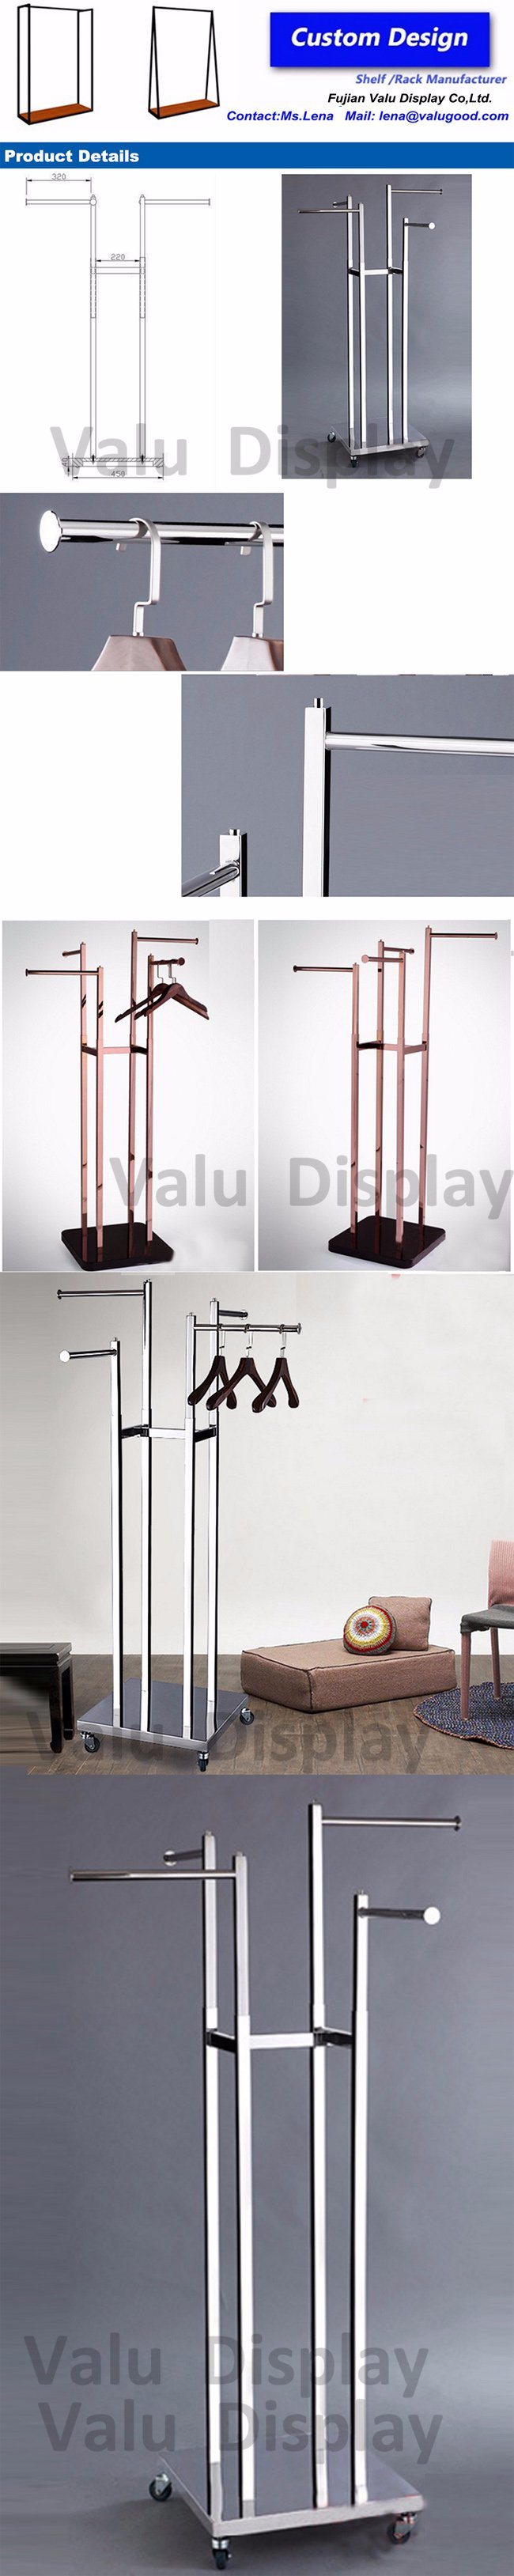 Movable Rolling Clothes Garment Rack with Wheels (VMS607)